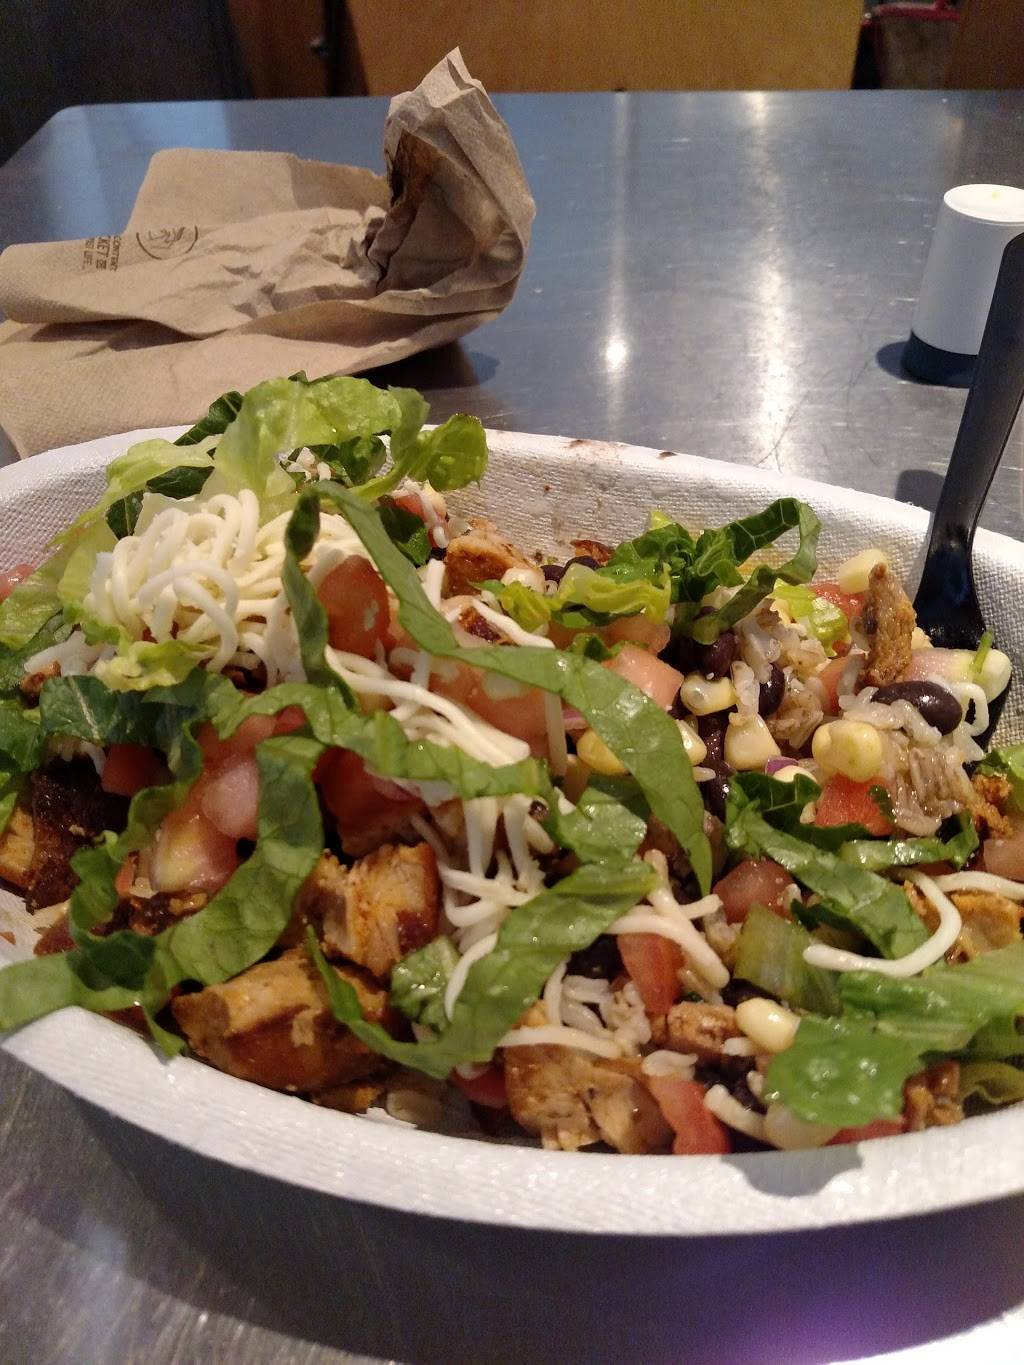 Chipotle Mexican Grill | 860 Rosedale Shopping Center Ste 1020, Roseville, MN 55113, USA | Phone: (651) 633-2300